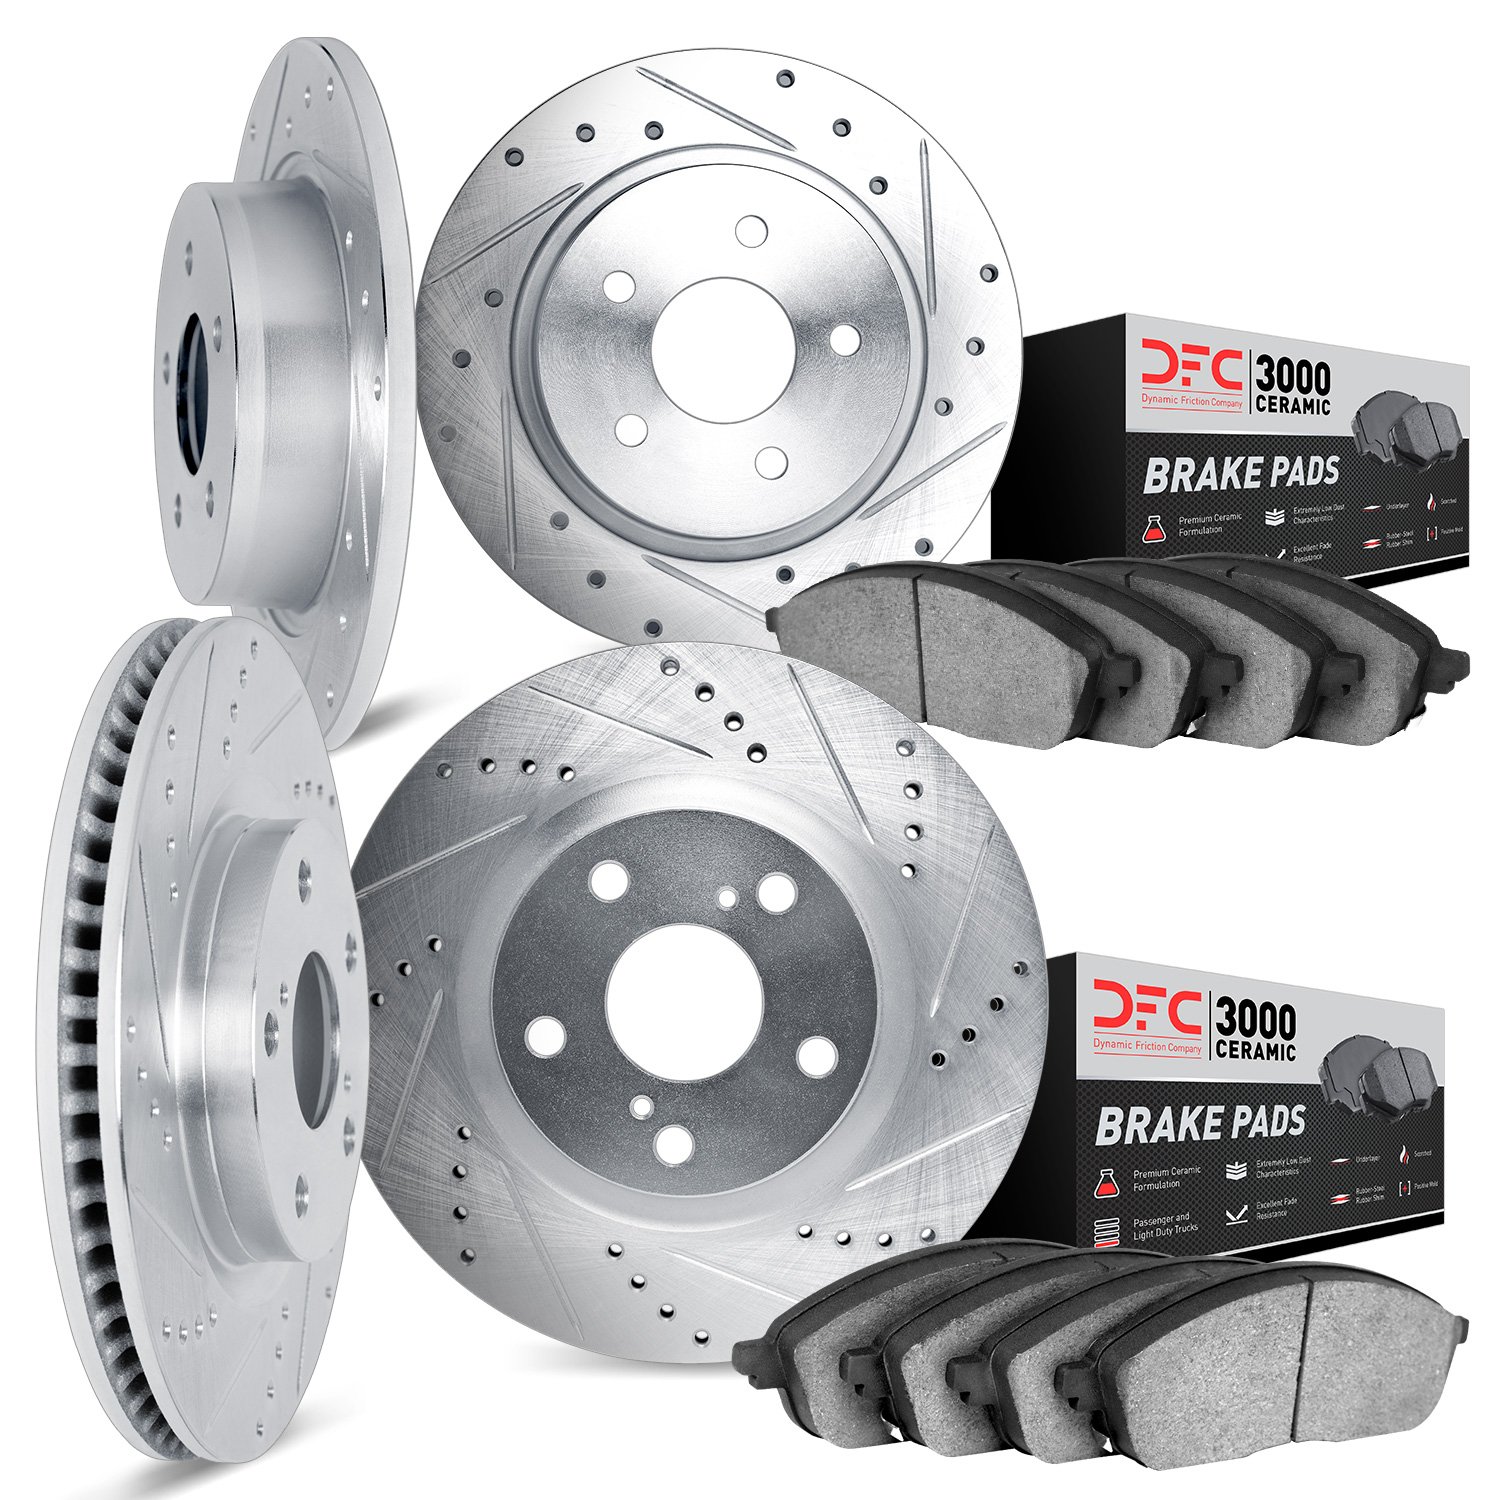 7304-54072 Drilled/Slotted Brake Rotor with 3000-Series Ceramic Brake Pads Kit [Silver], 2013-2018 Ford/Lincoln/Mercury/Mazda, P